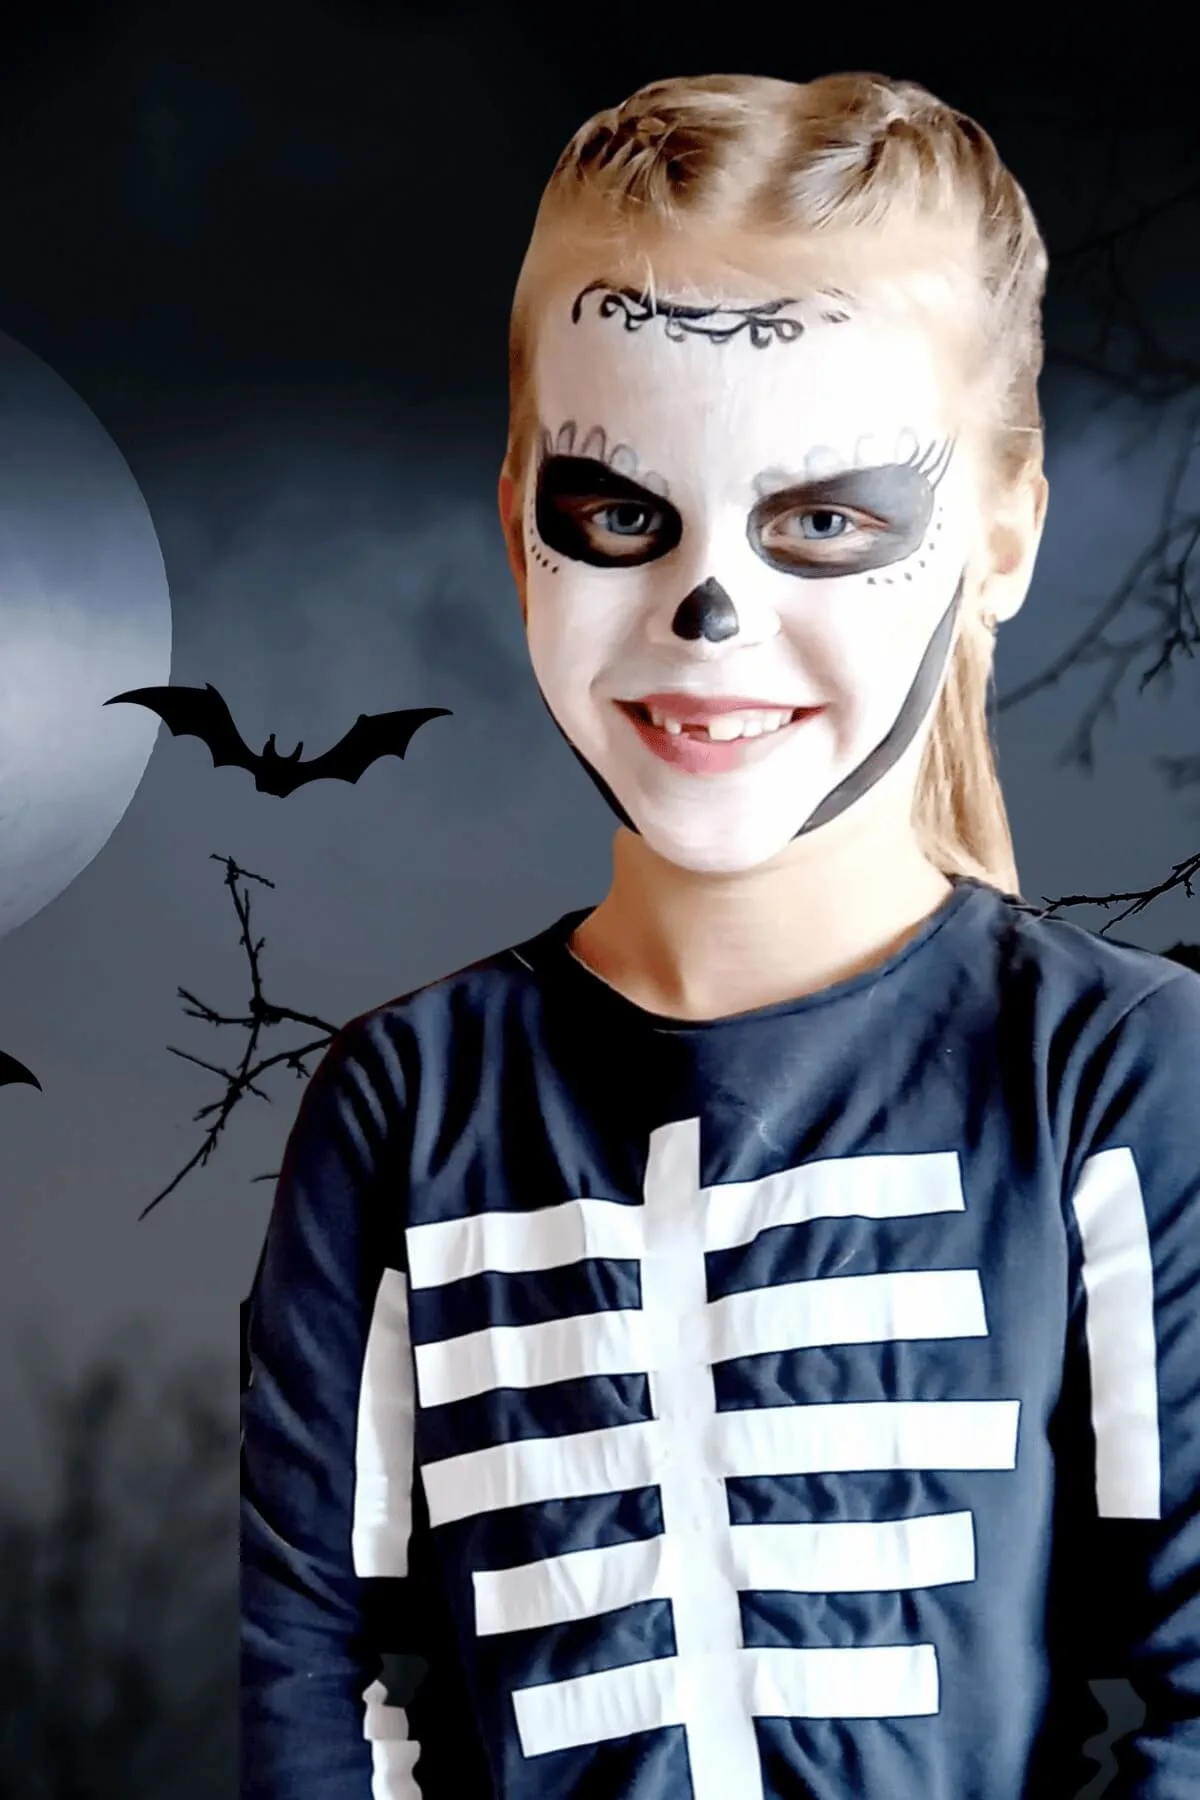 Simple skeleton costume for a child.